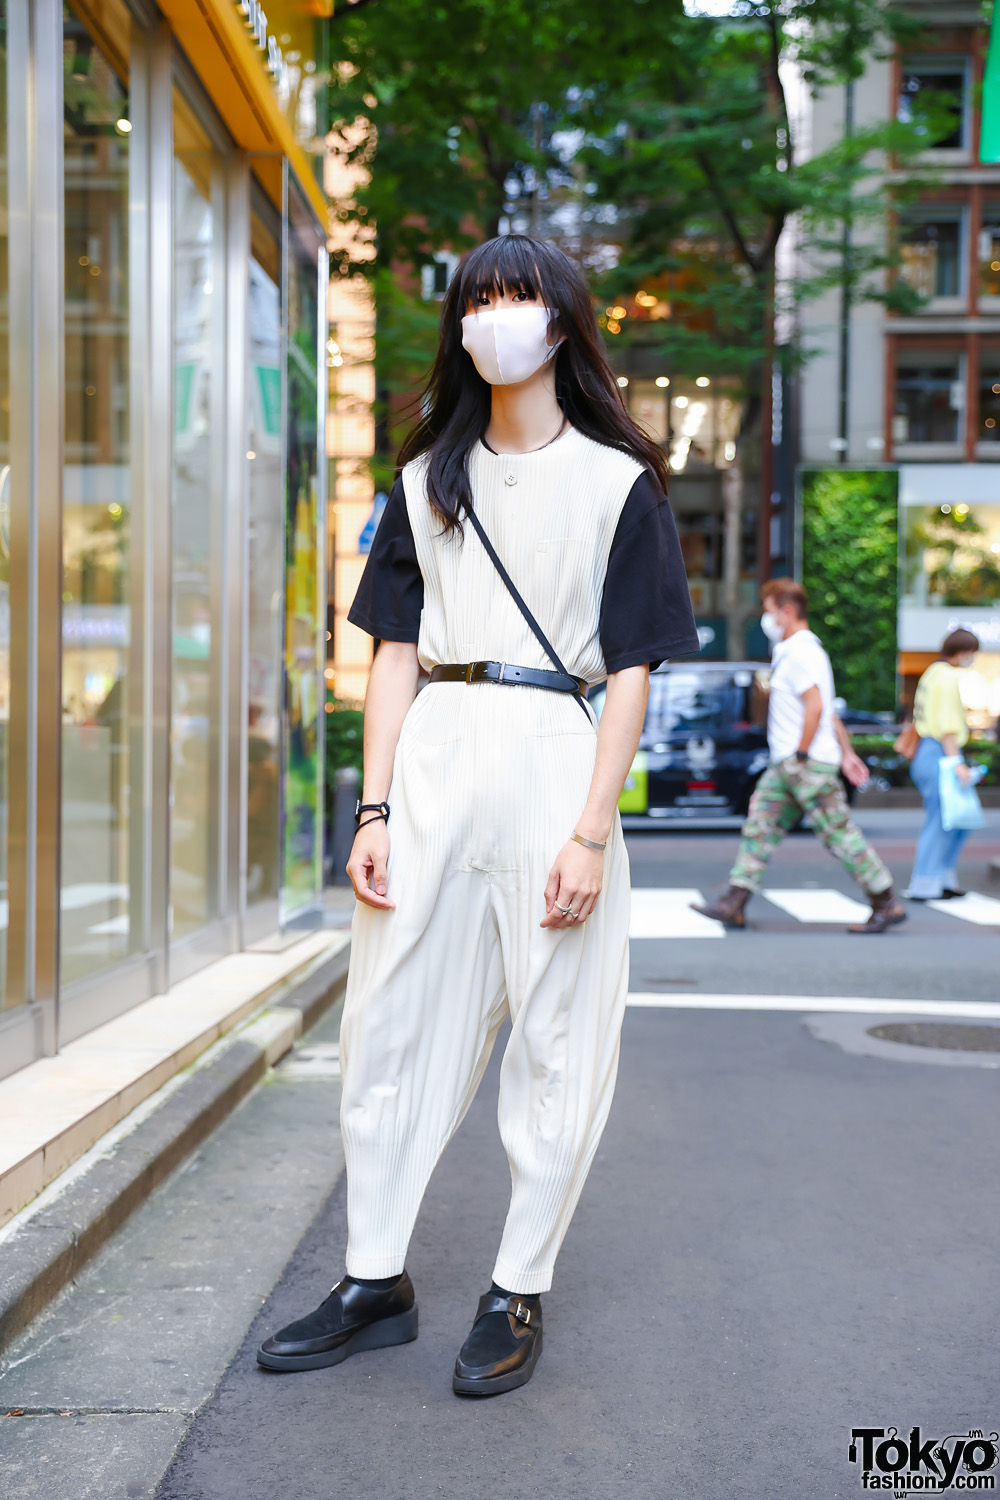 Monochromatic Street Style w/ Homme Plissé Issey Miyake Overalls, Hatra Crossbody Bag, Lad Musician Shoes & Dior, Jil Sander, Tiffany & Co. Accessories